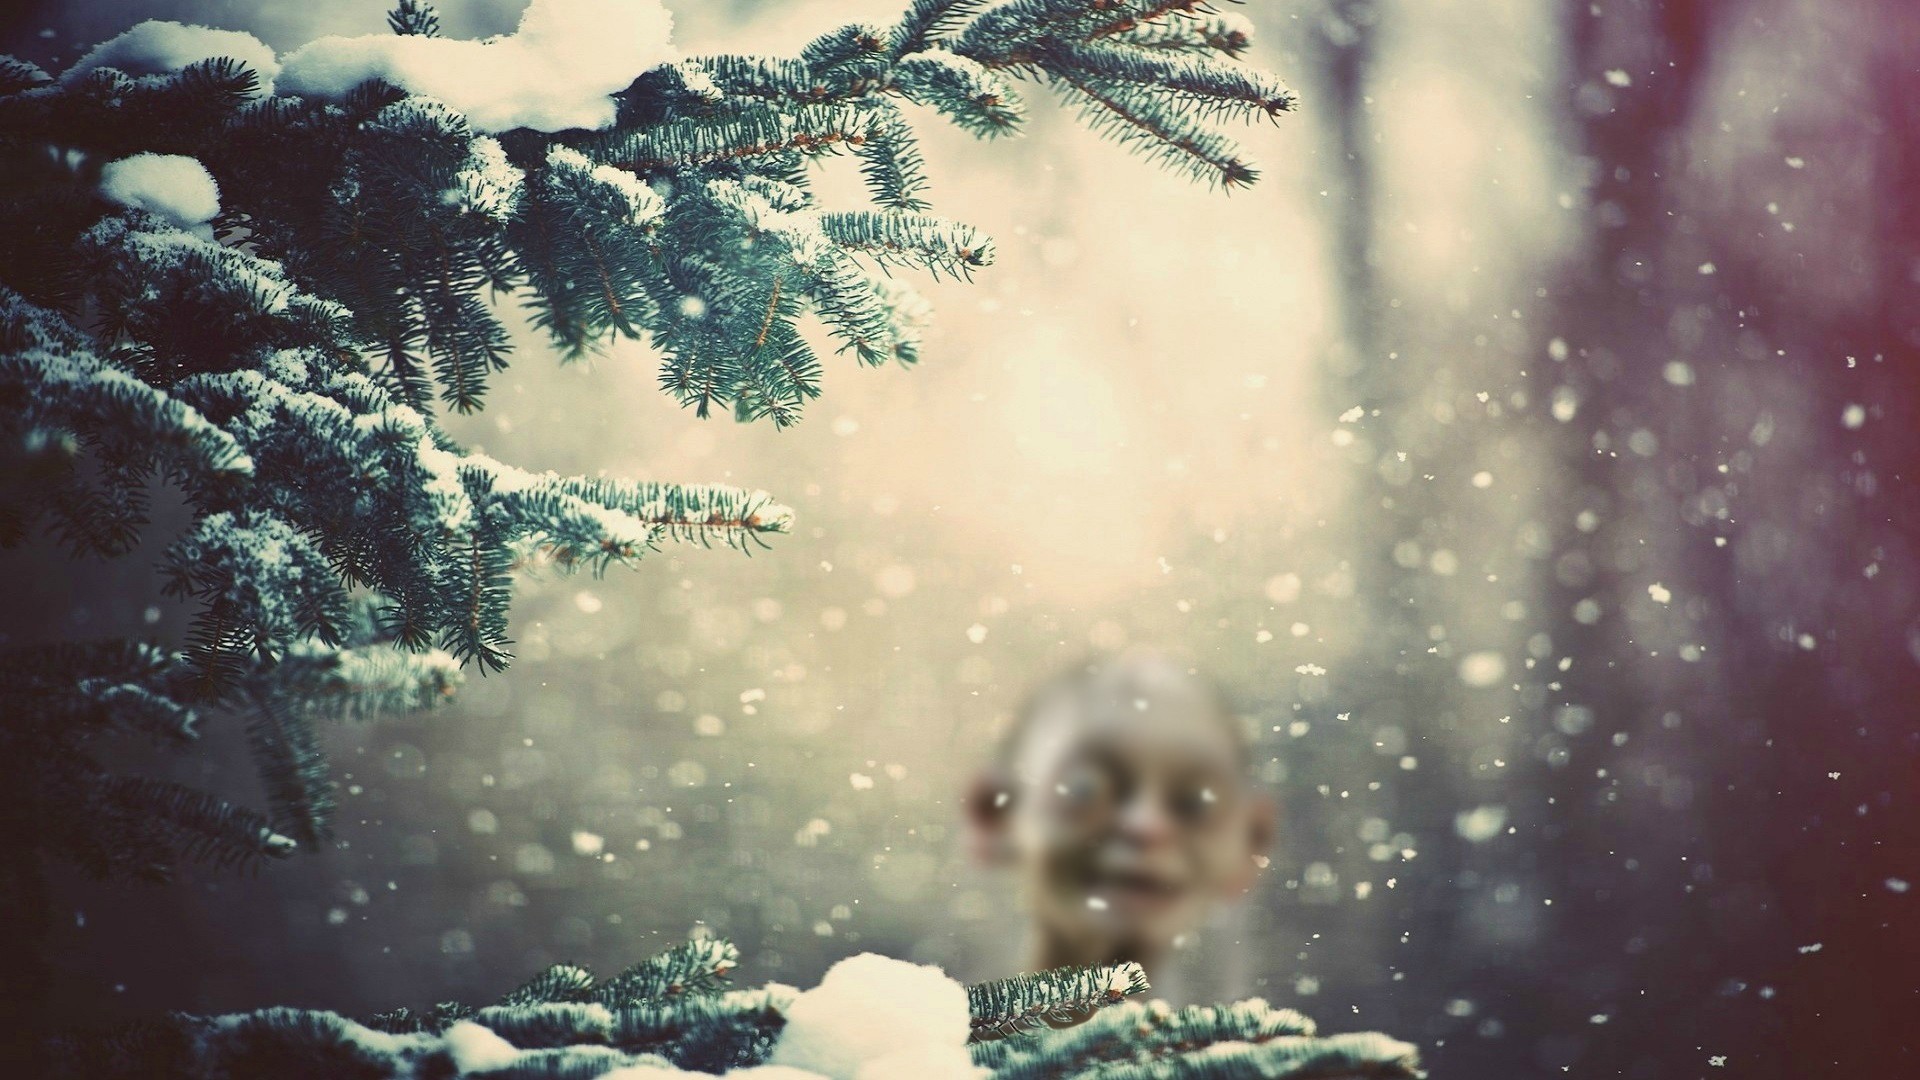 General 1920x1080 The Lord of the Rings Smeagol winter snow Book characters